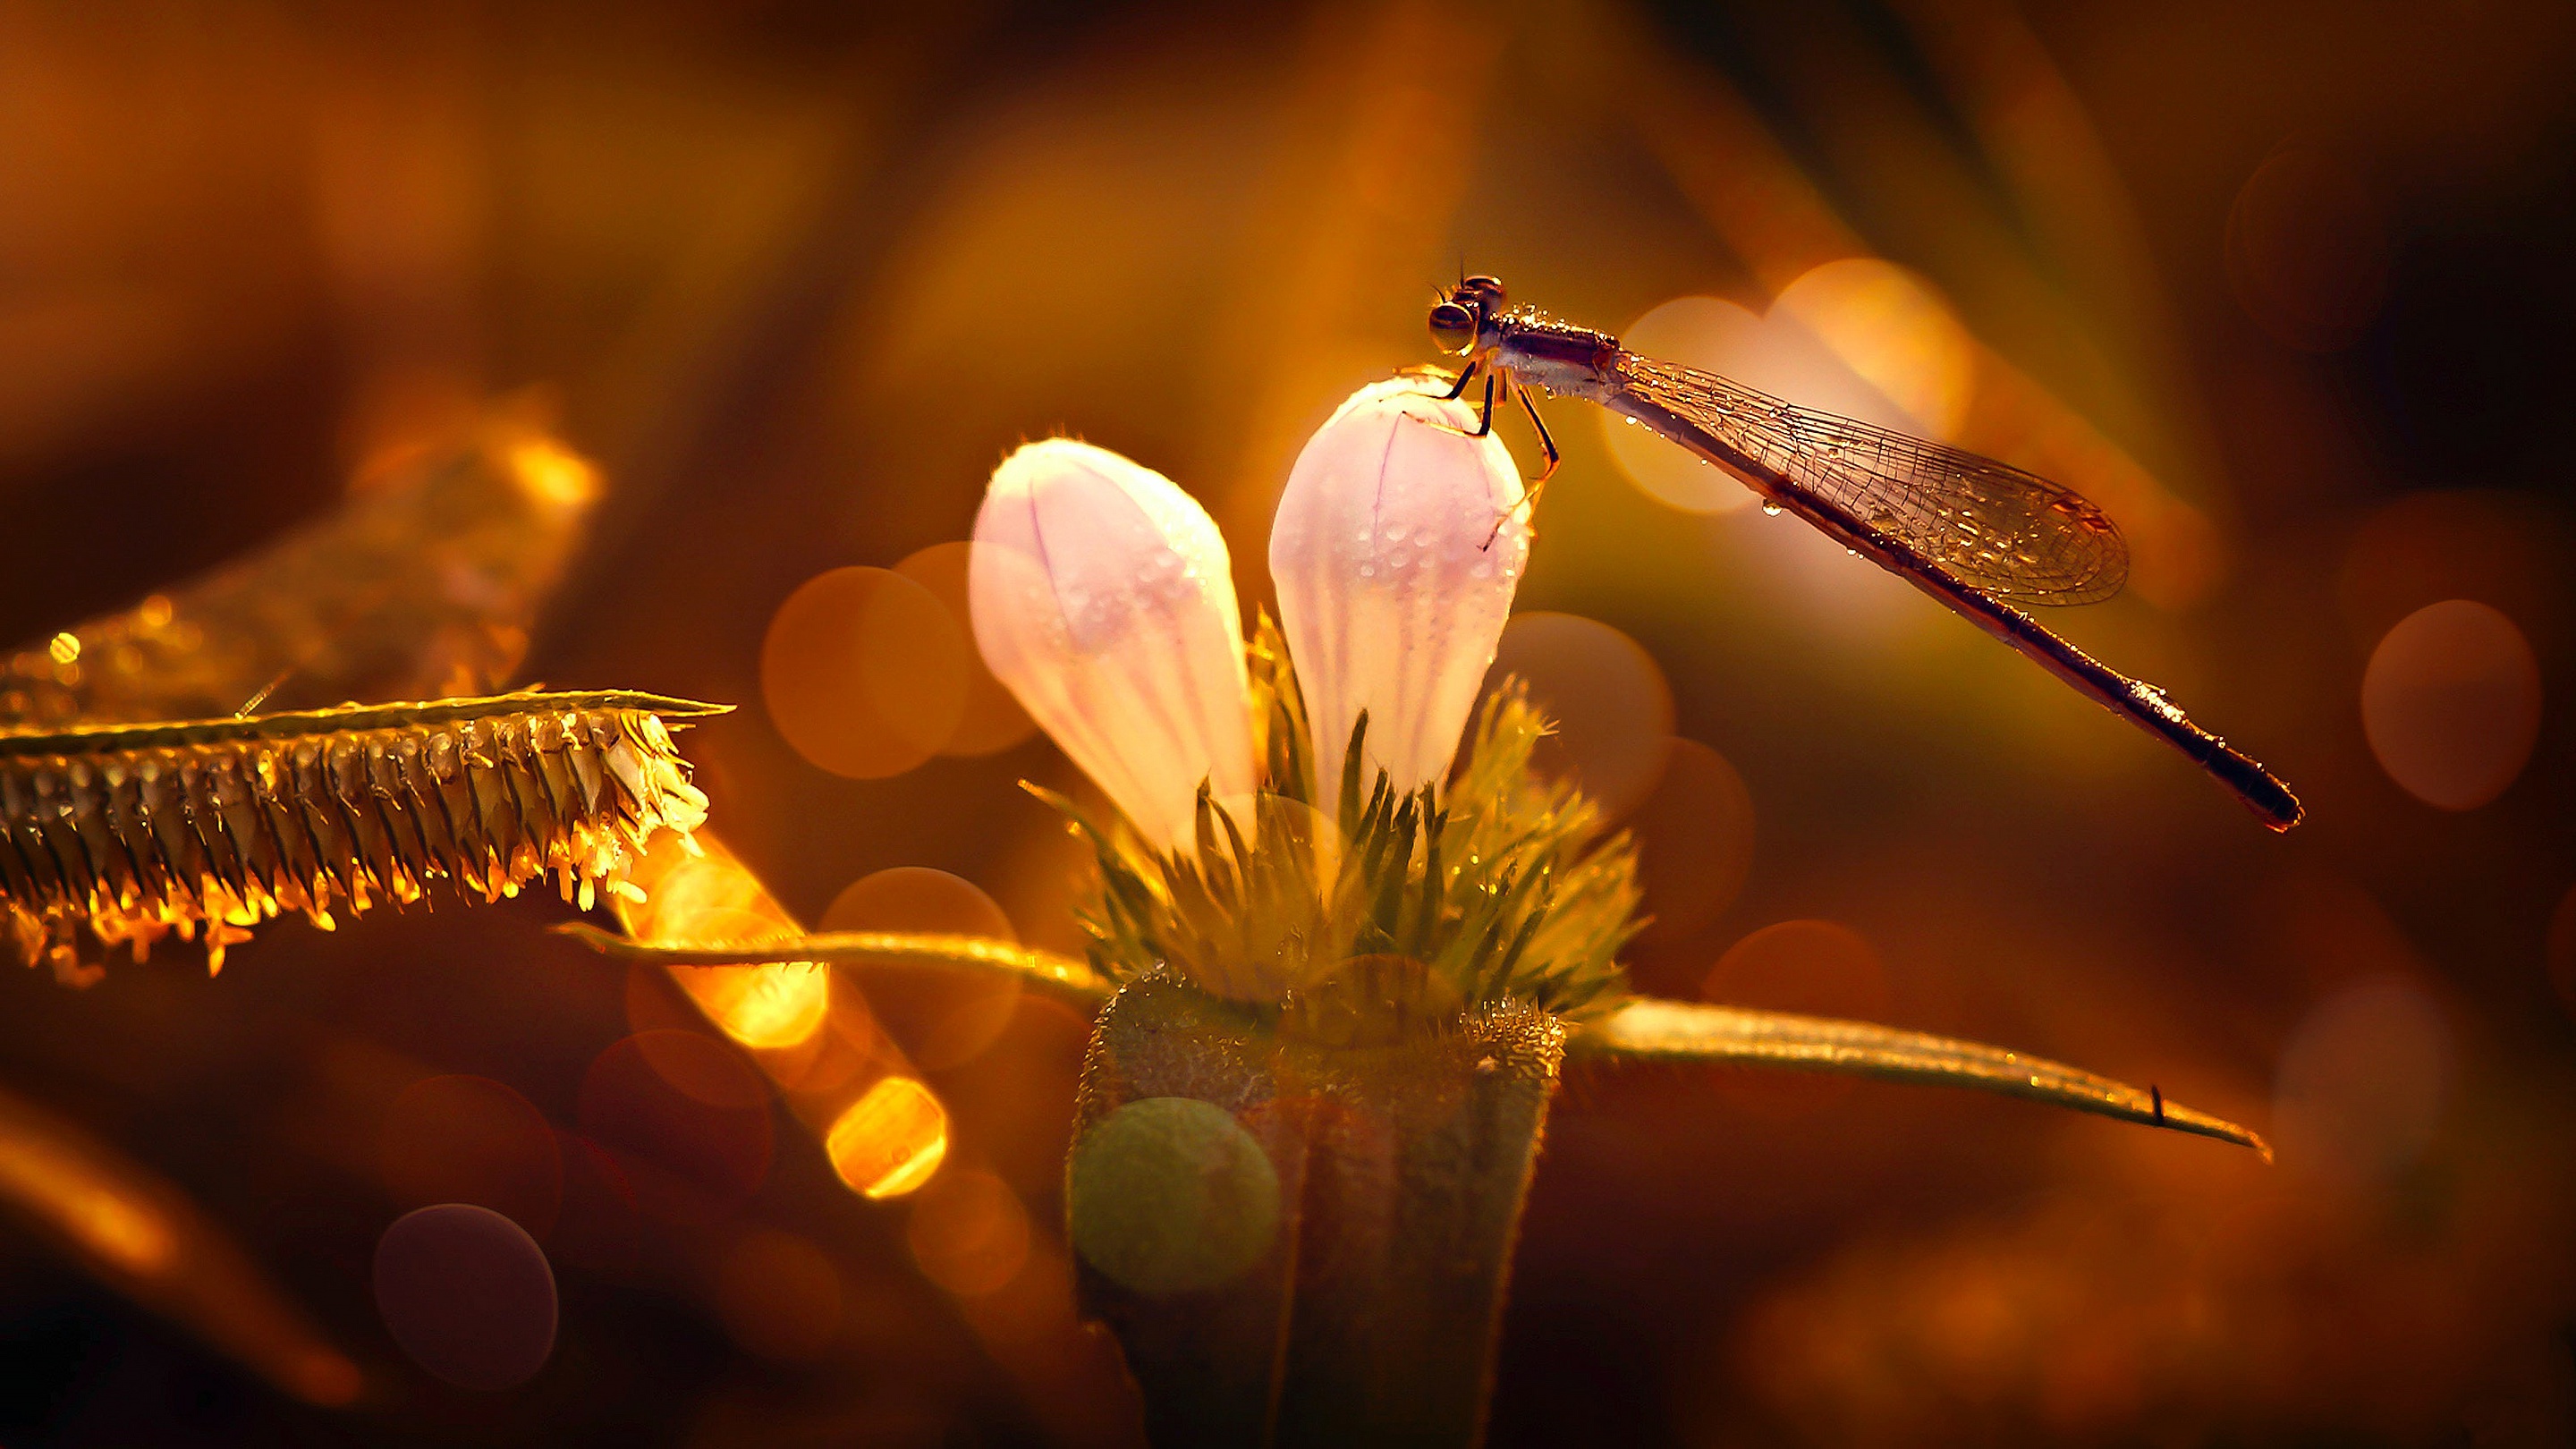 Dragonfly Flower Insect 2880x1620